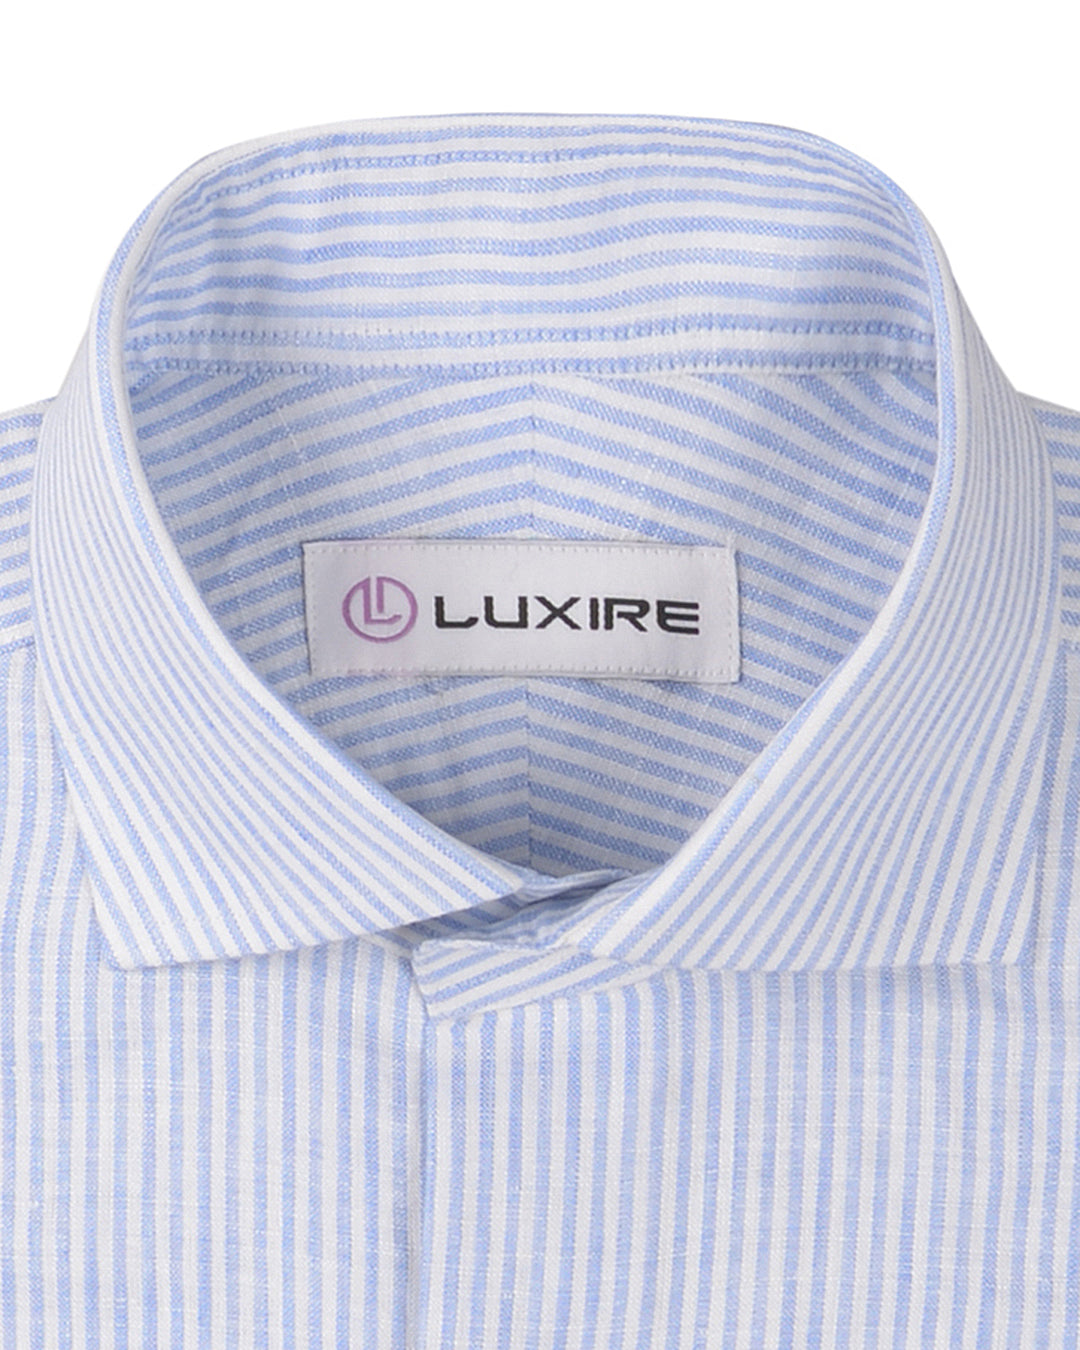 Collar of the custom linen shirt for men in light blue dress stripes by Luxire Clothing